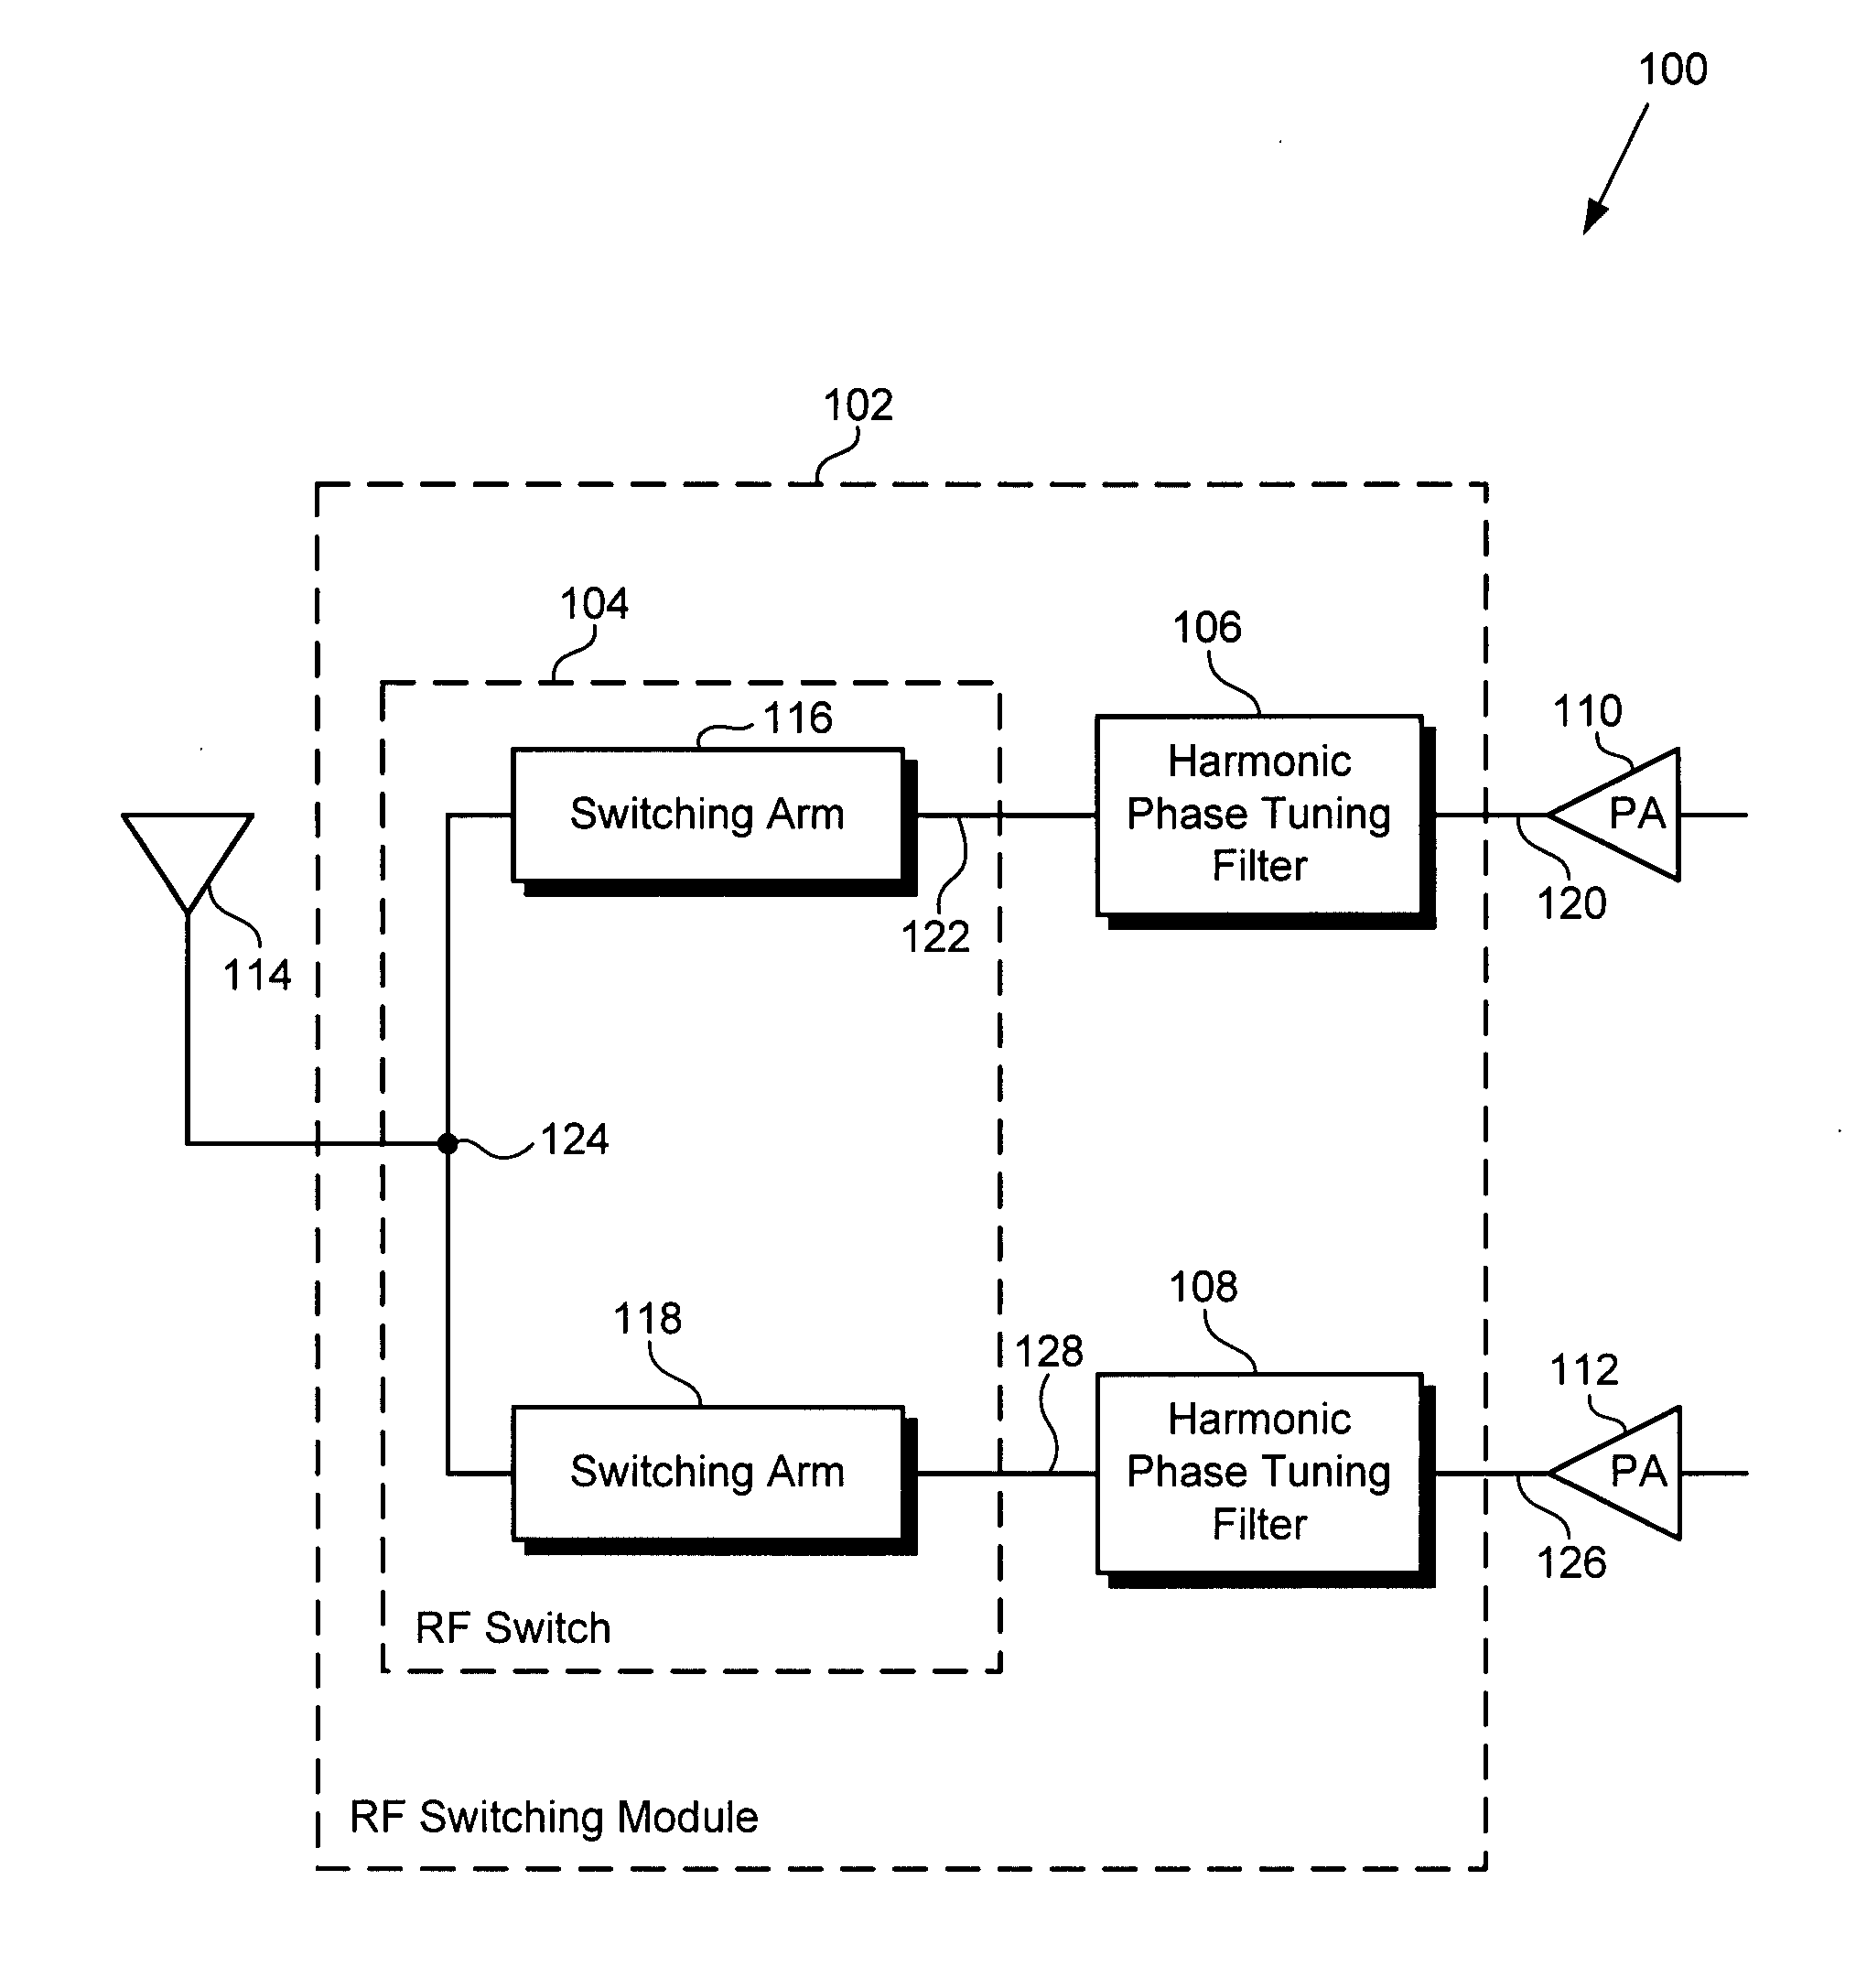 Harmonic phase tuning filter for RF switches